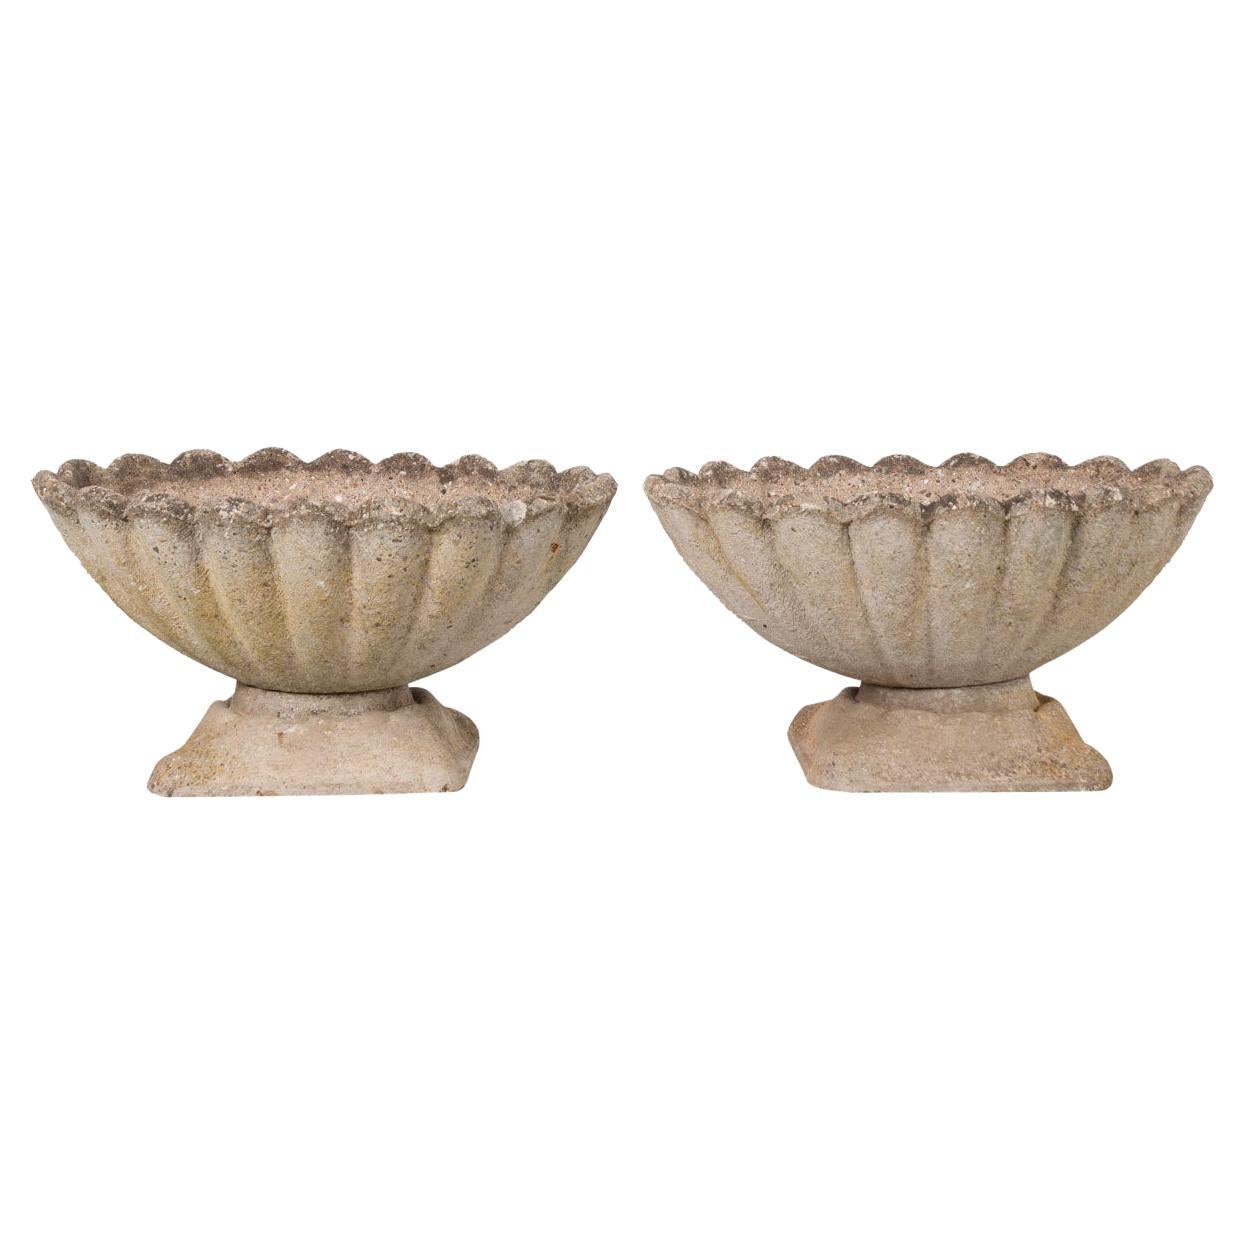 Pair of English Scalloped Urns